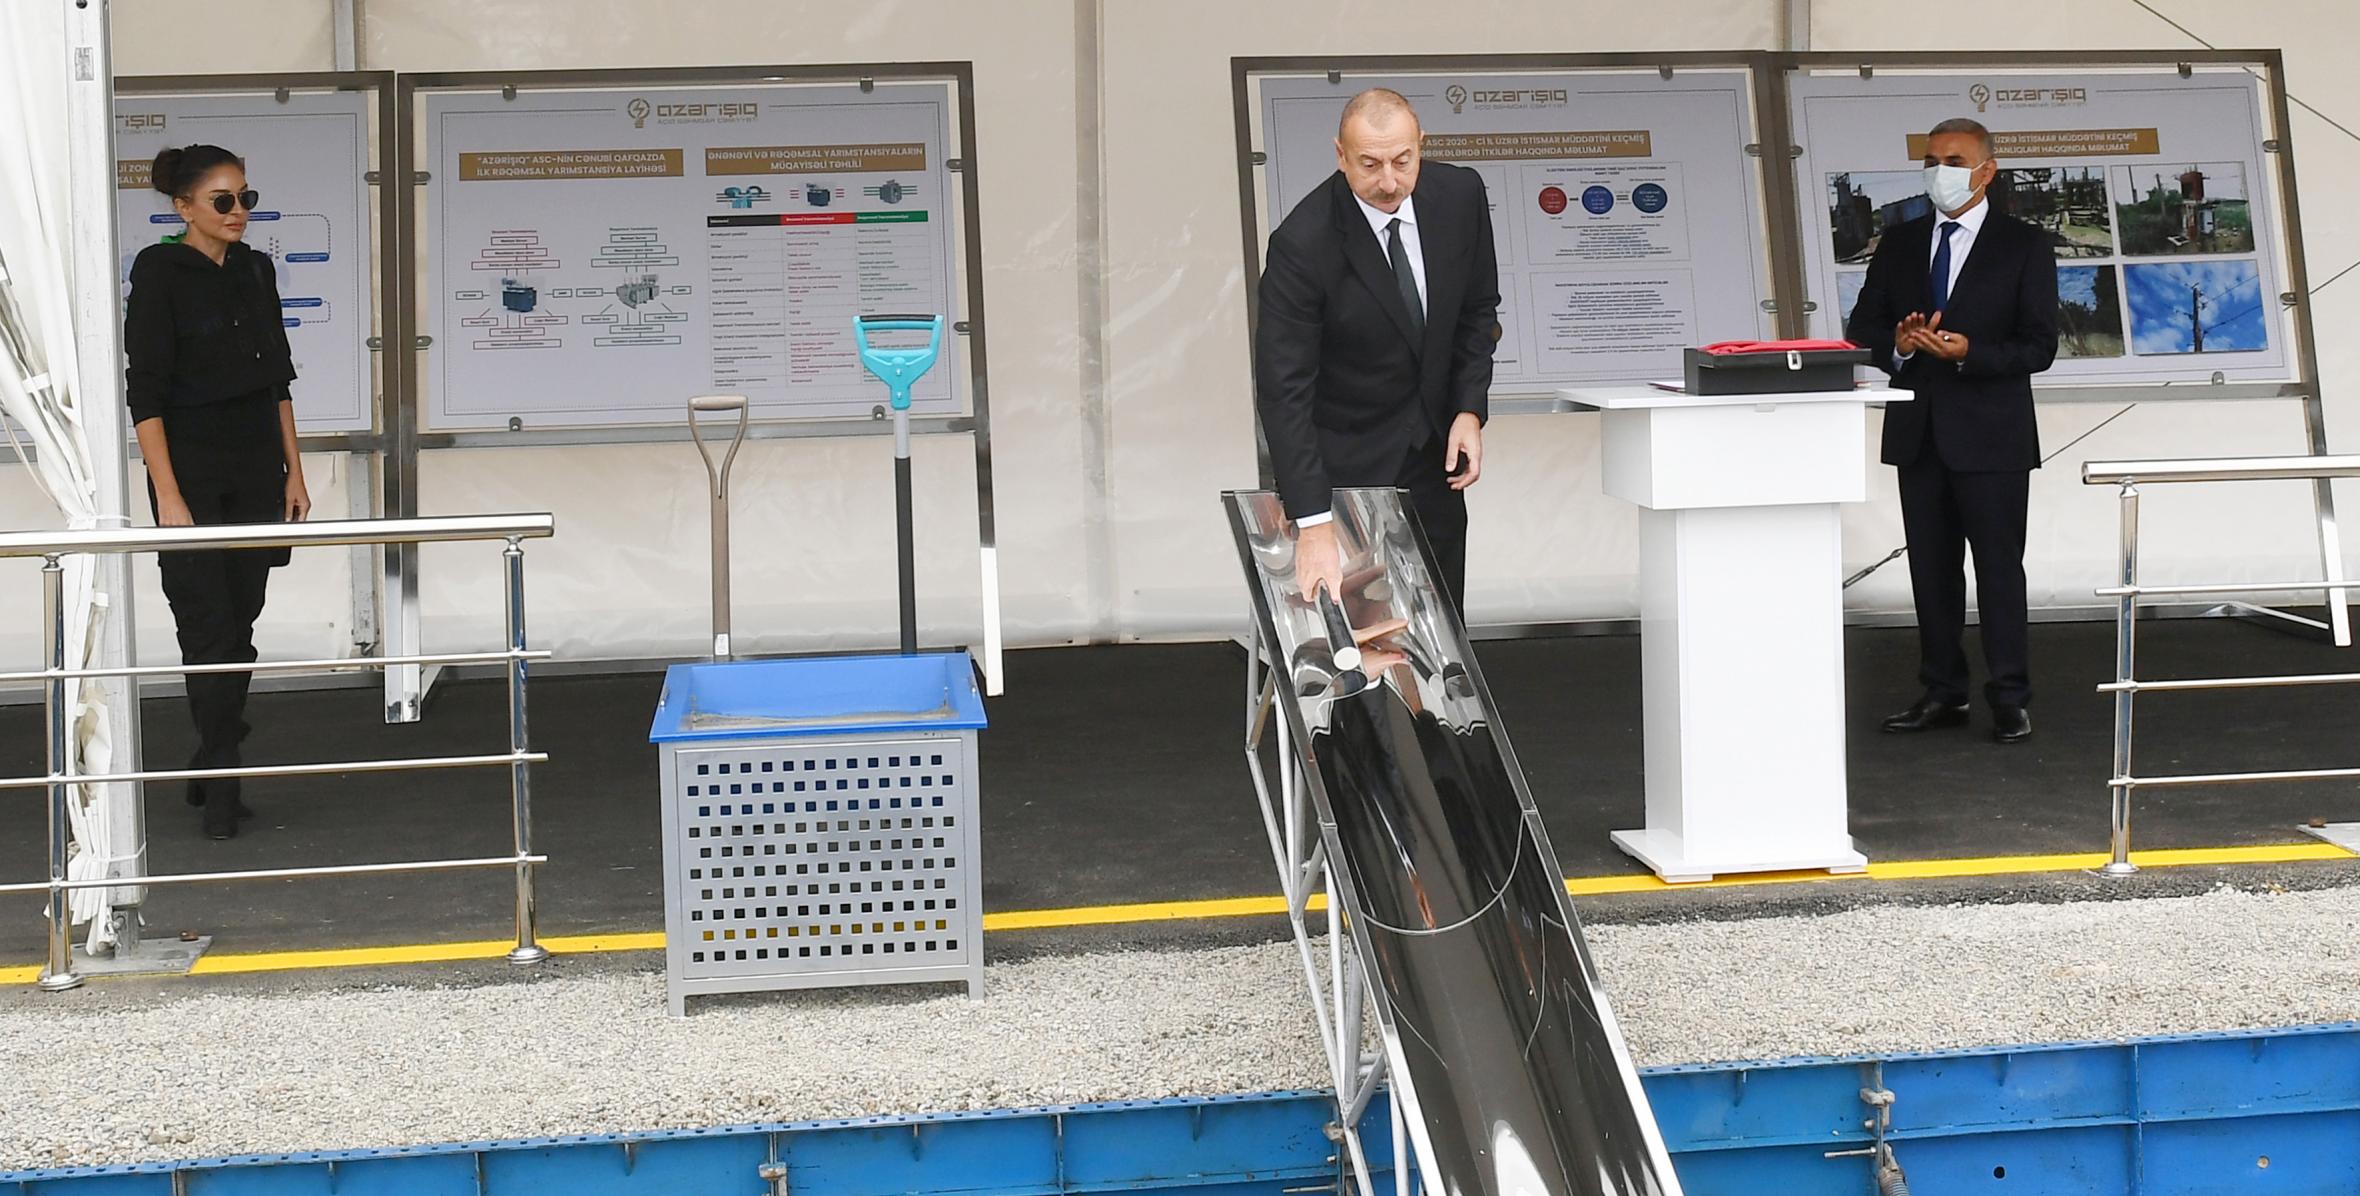 Ilham Aliyev attended a groundbreaking ceremony for Digital Station Management Center in the city of Fuzuli